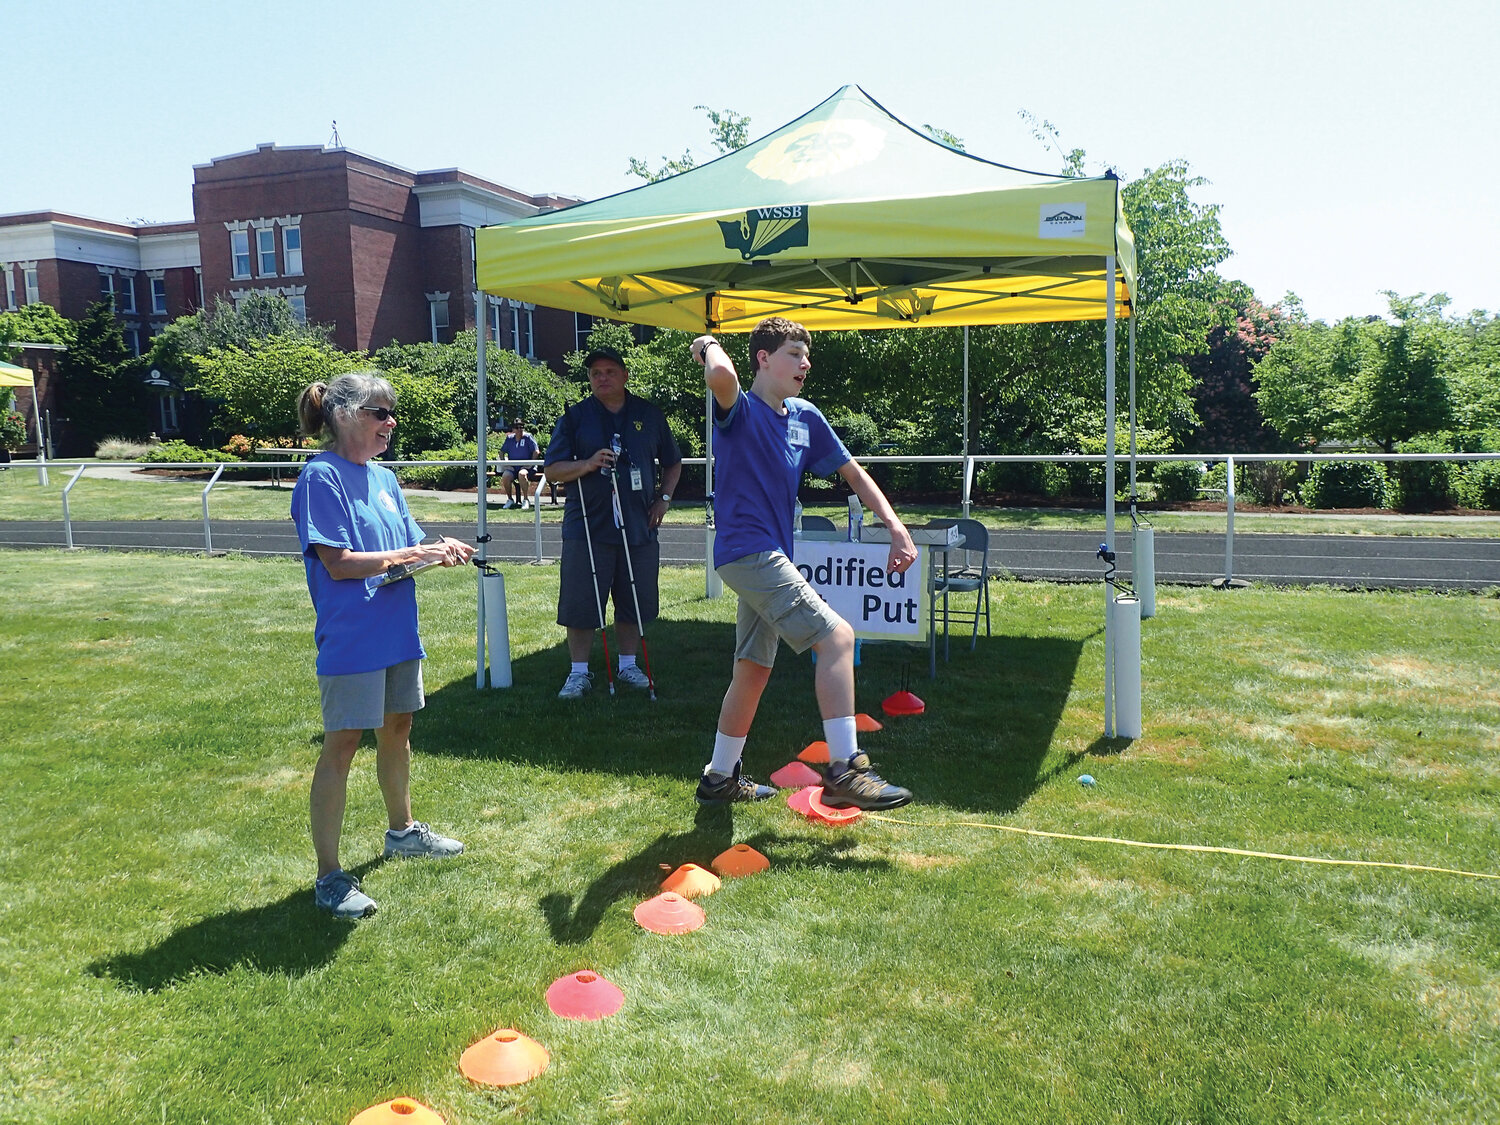 Ridgefield Lions Club member Roxanne Cortez assists at the modified shot put while athlete Eric Bickford participates at the Washington State School for the Blind’s annual track and field day on May 18.